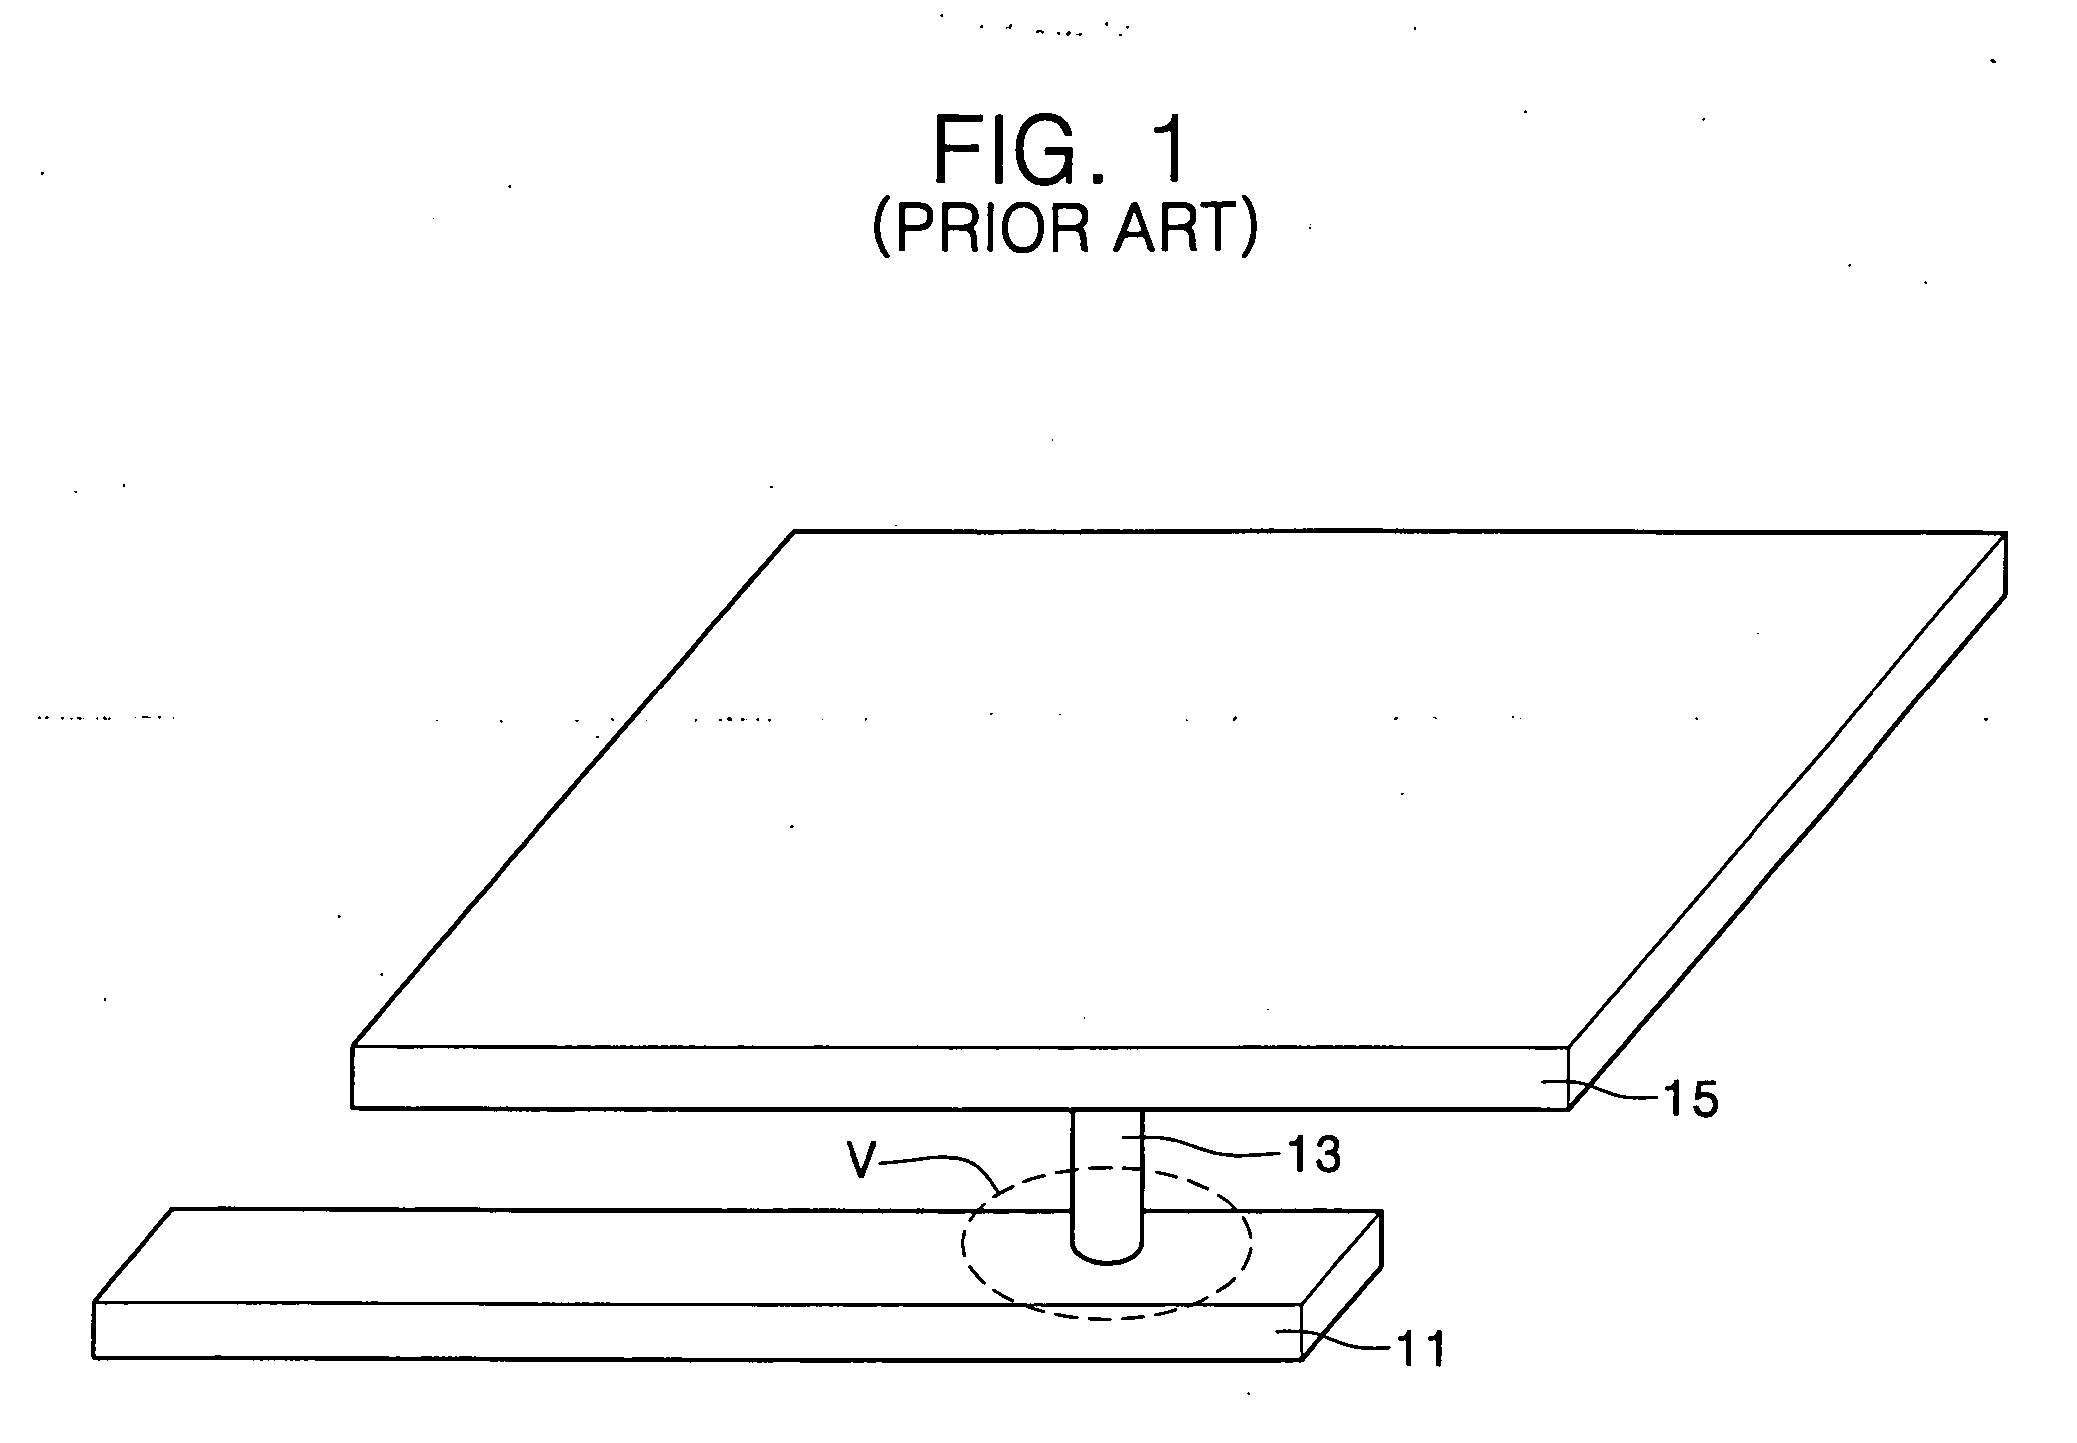 Selective copper alloy interconnections in semiconductor devices and methods of forming the same